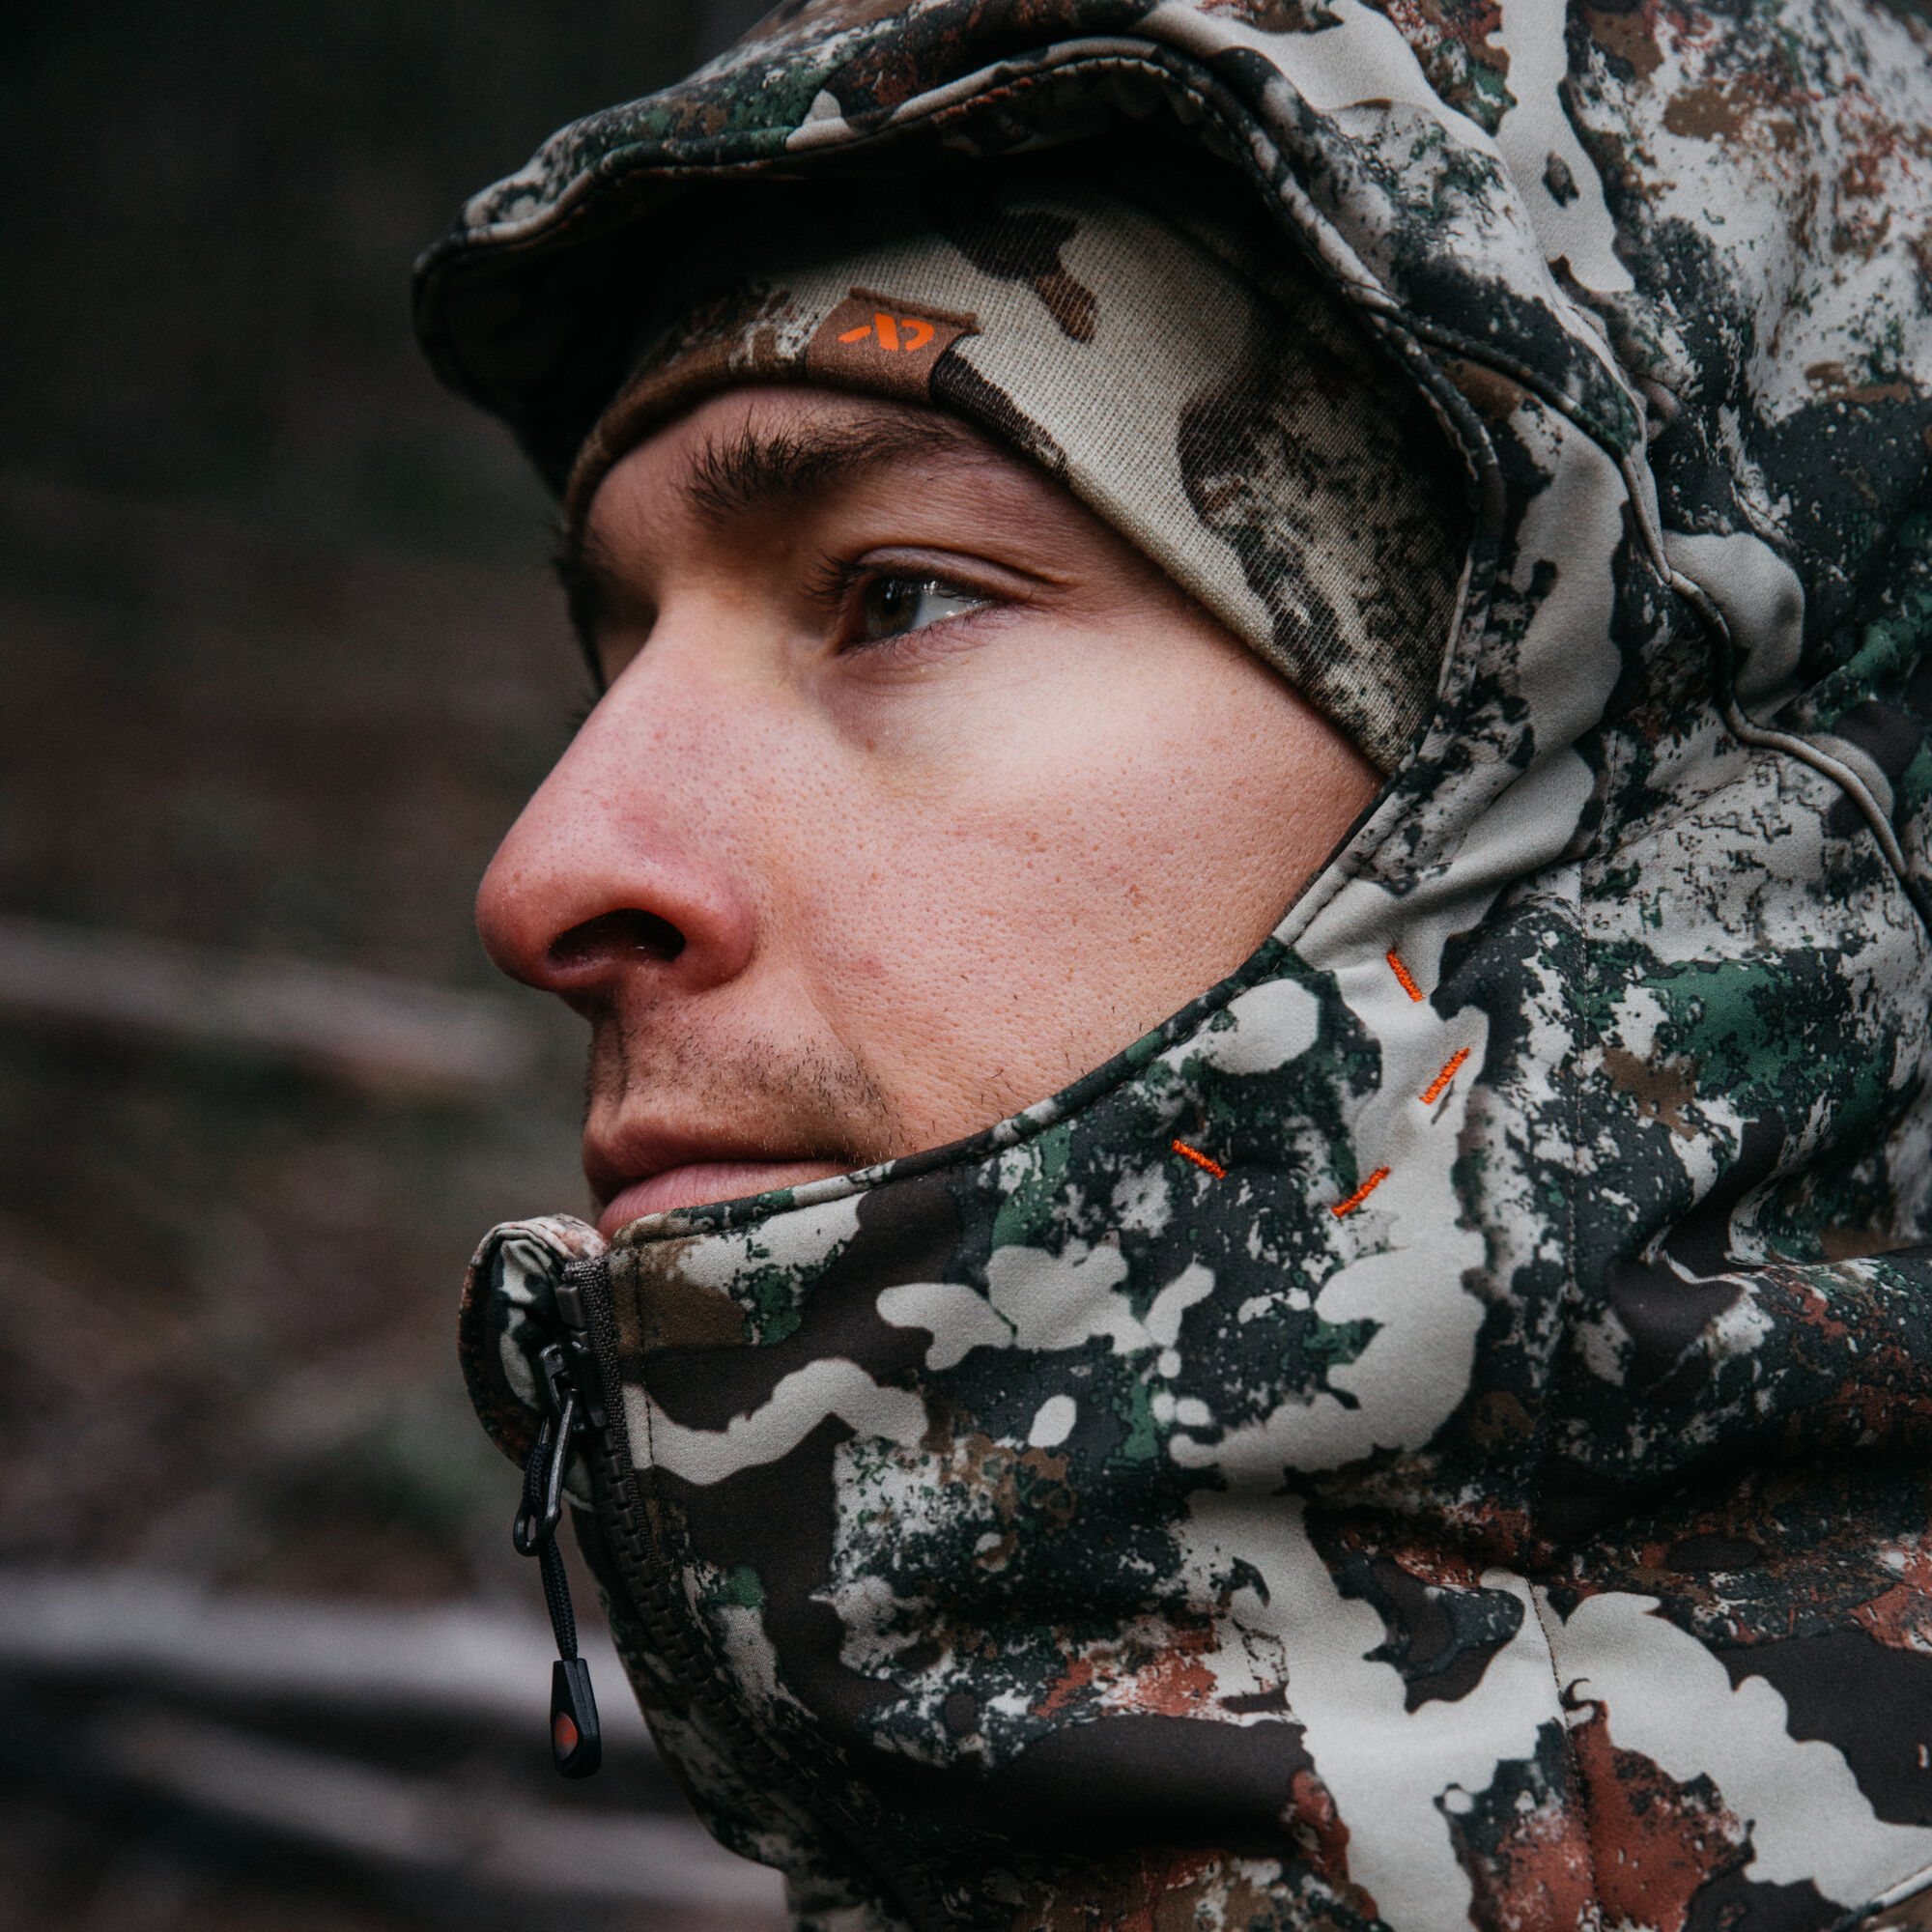 Sanctuary 2.0 Insulated Jacket | First Lite